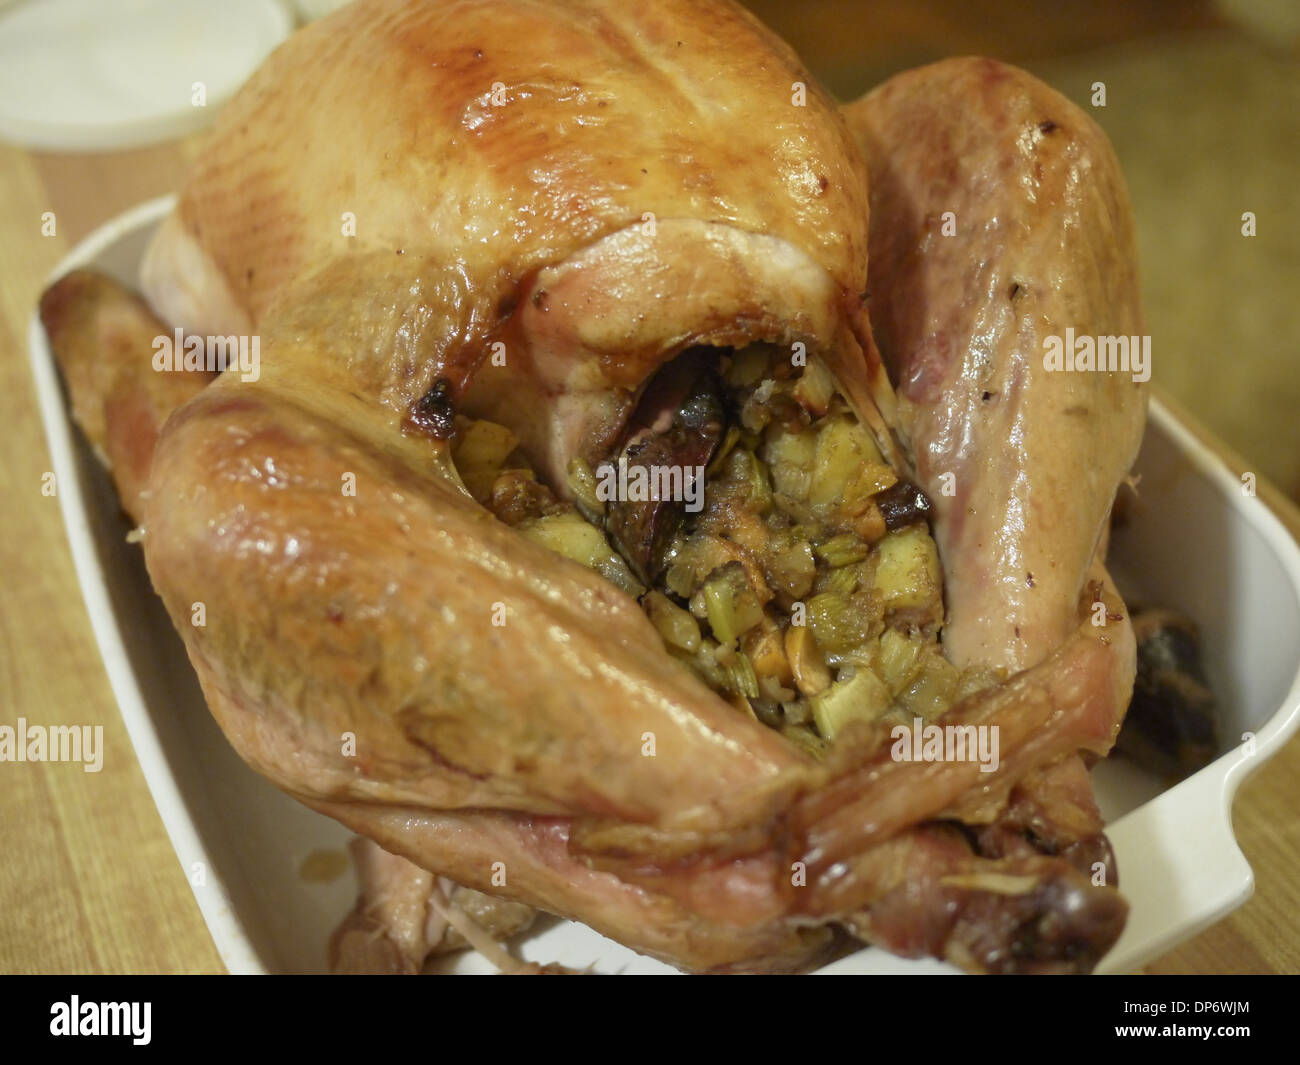 stuffing leaking out from a home cooked turkey during thanksgiving Stock Photo